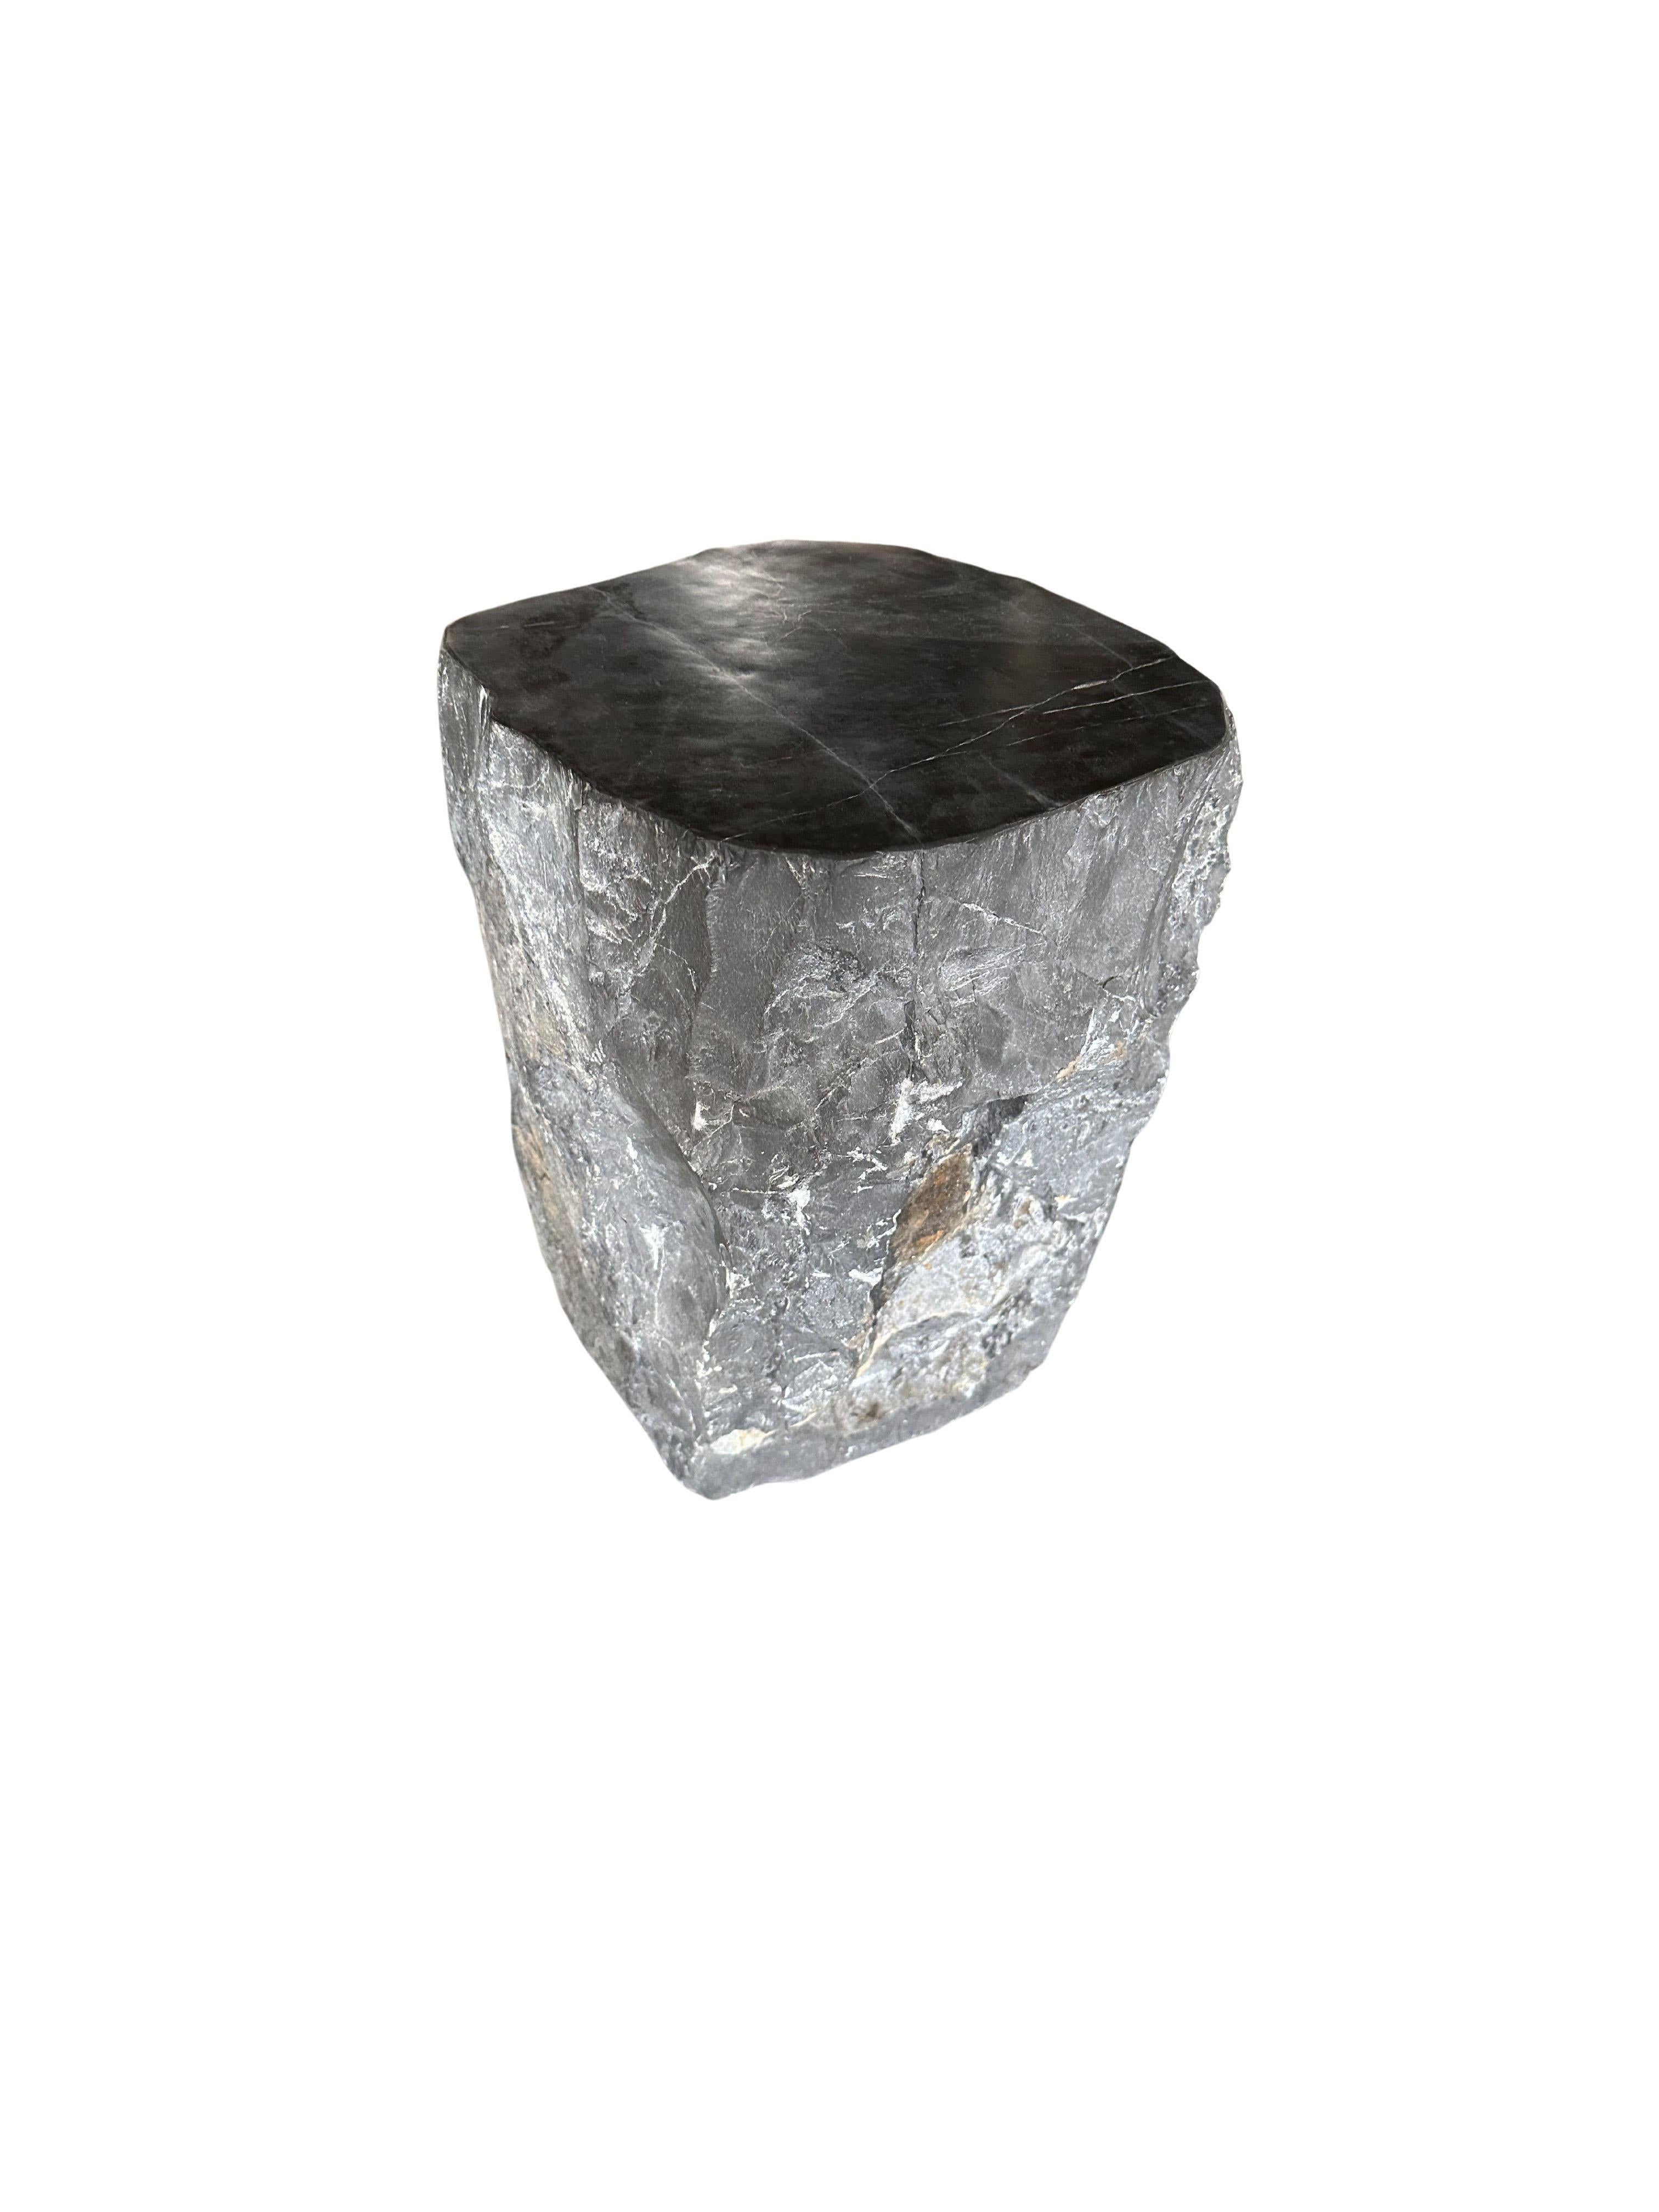 A wonderfully organic solid marble side table with a polished top and hand chiseled sides. The mix of textures and shades adds to its charm.